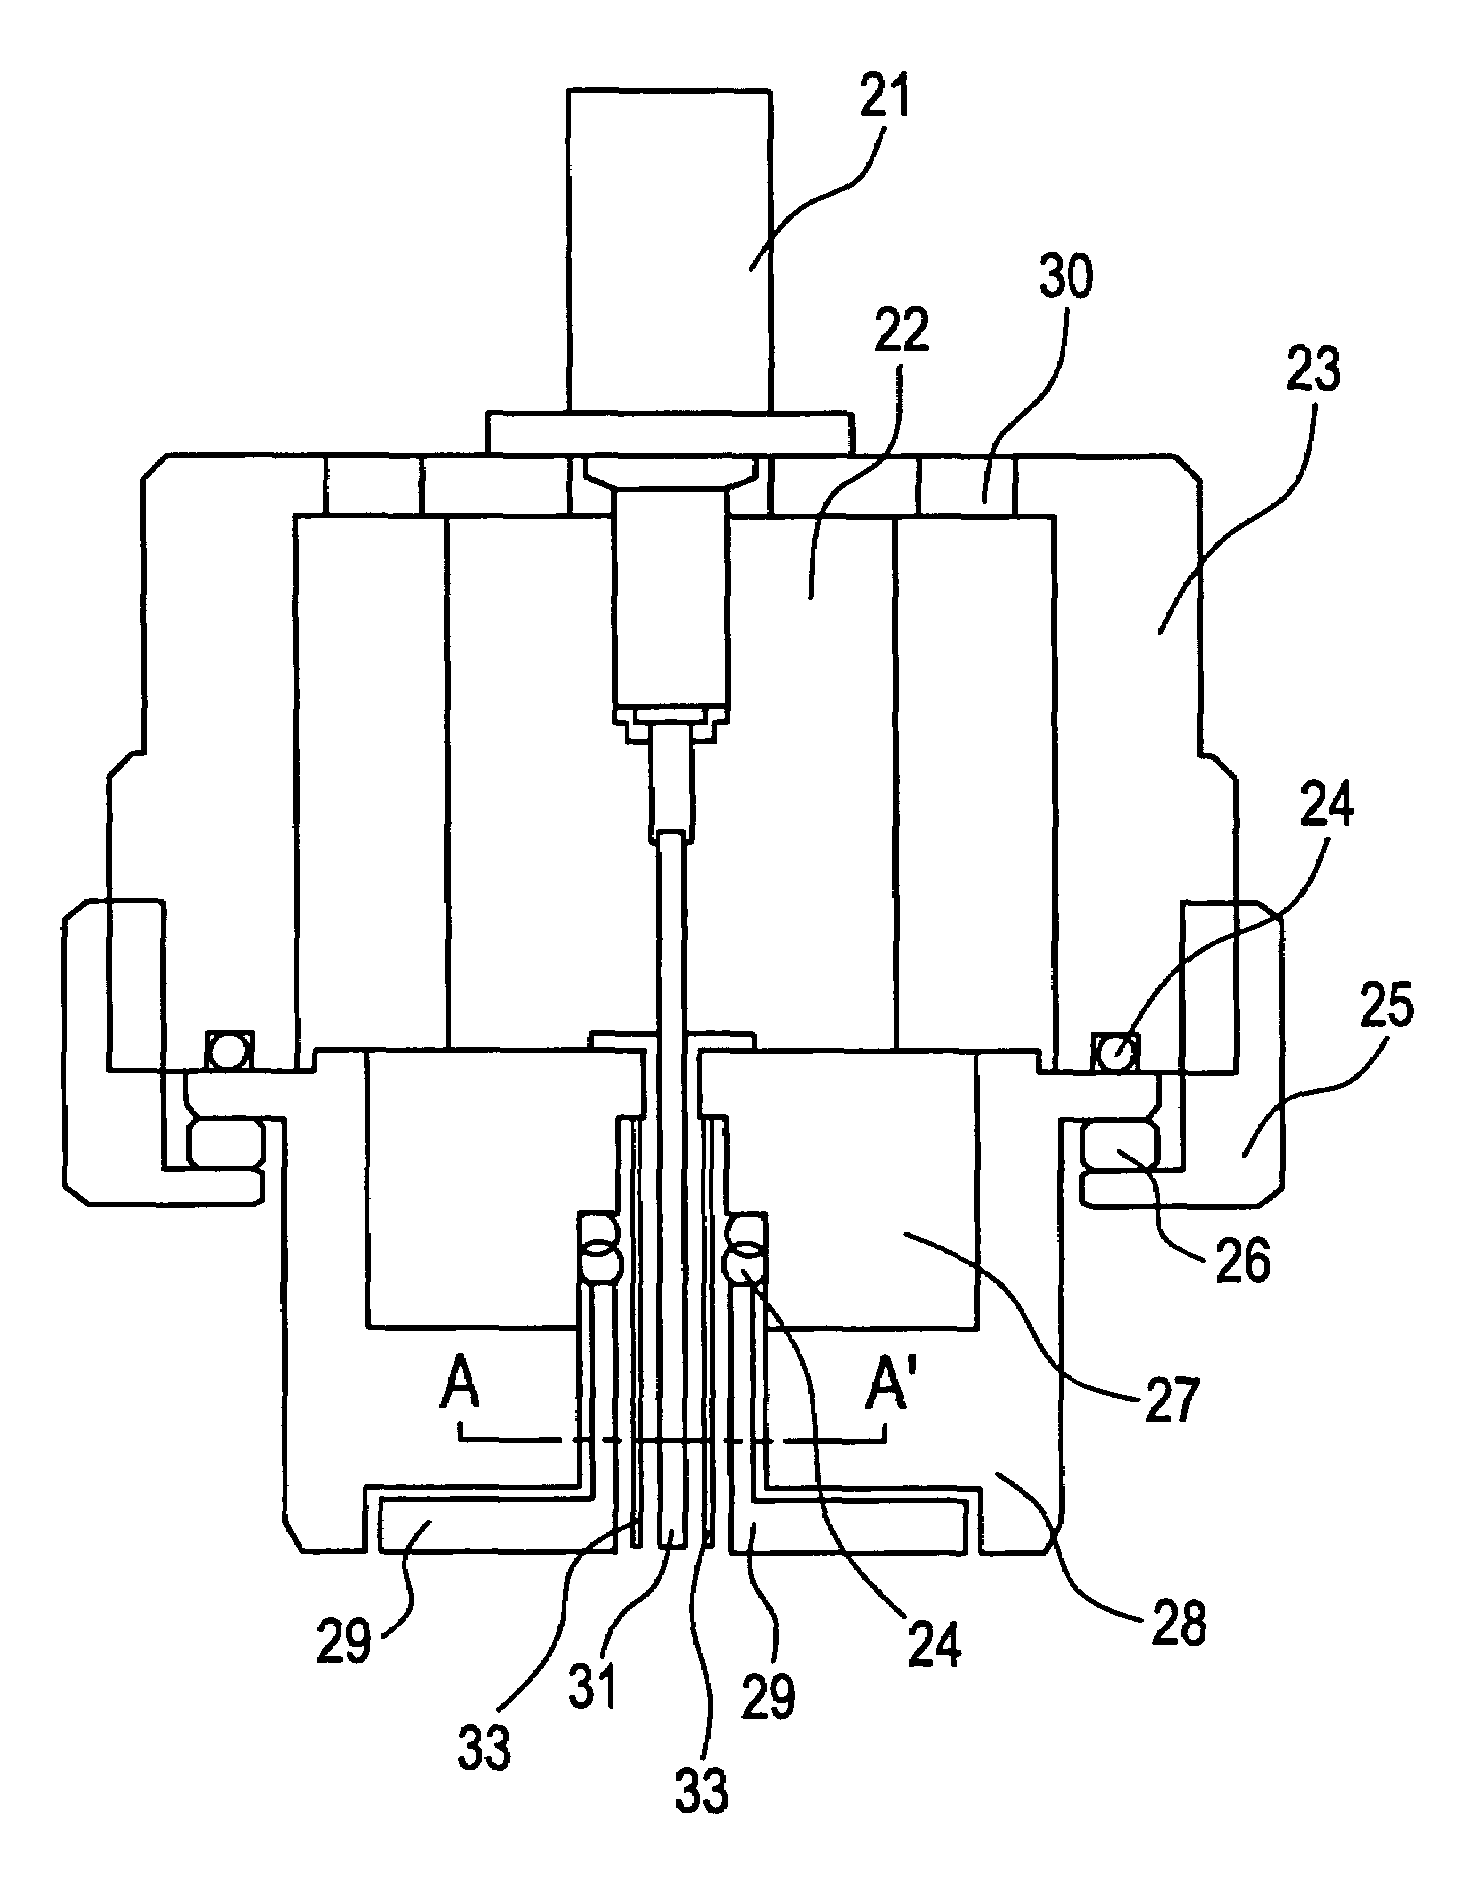 Apparatus for fabricating coating and method of fabricating the coating